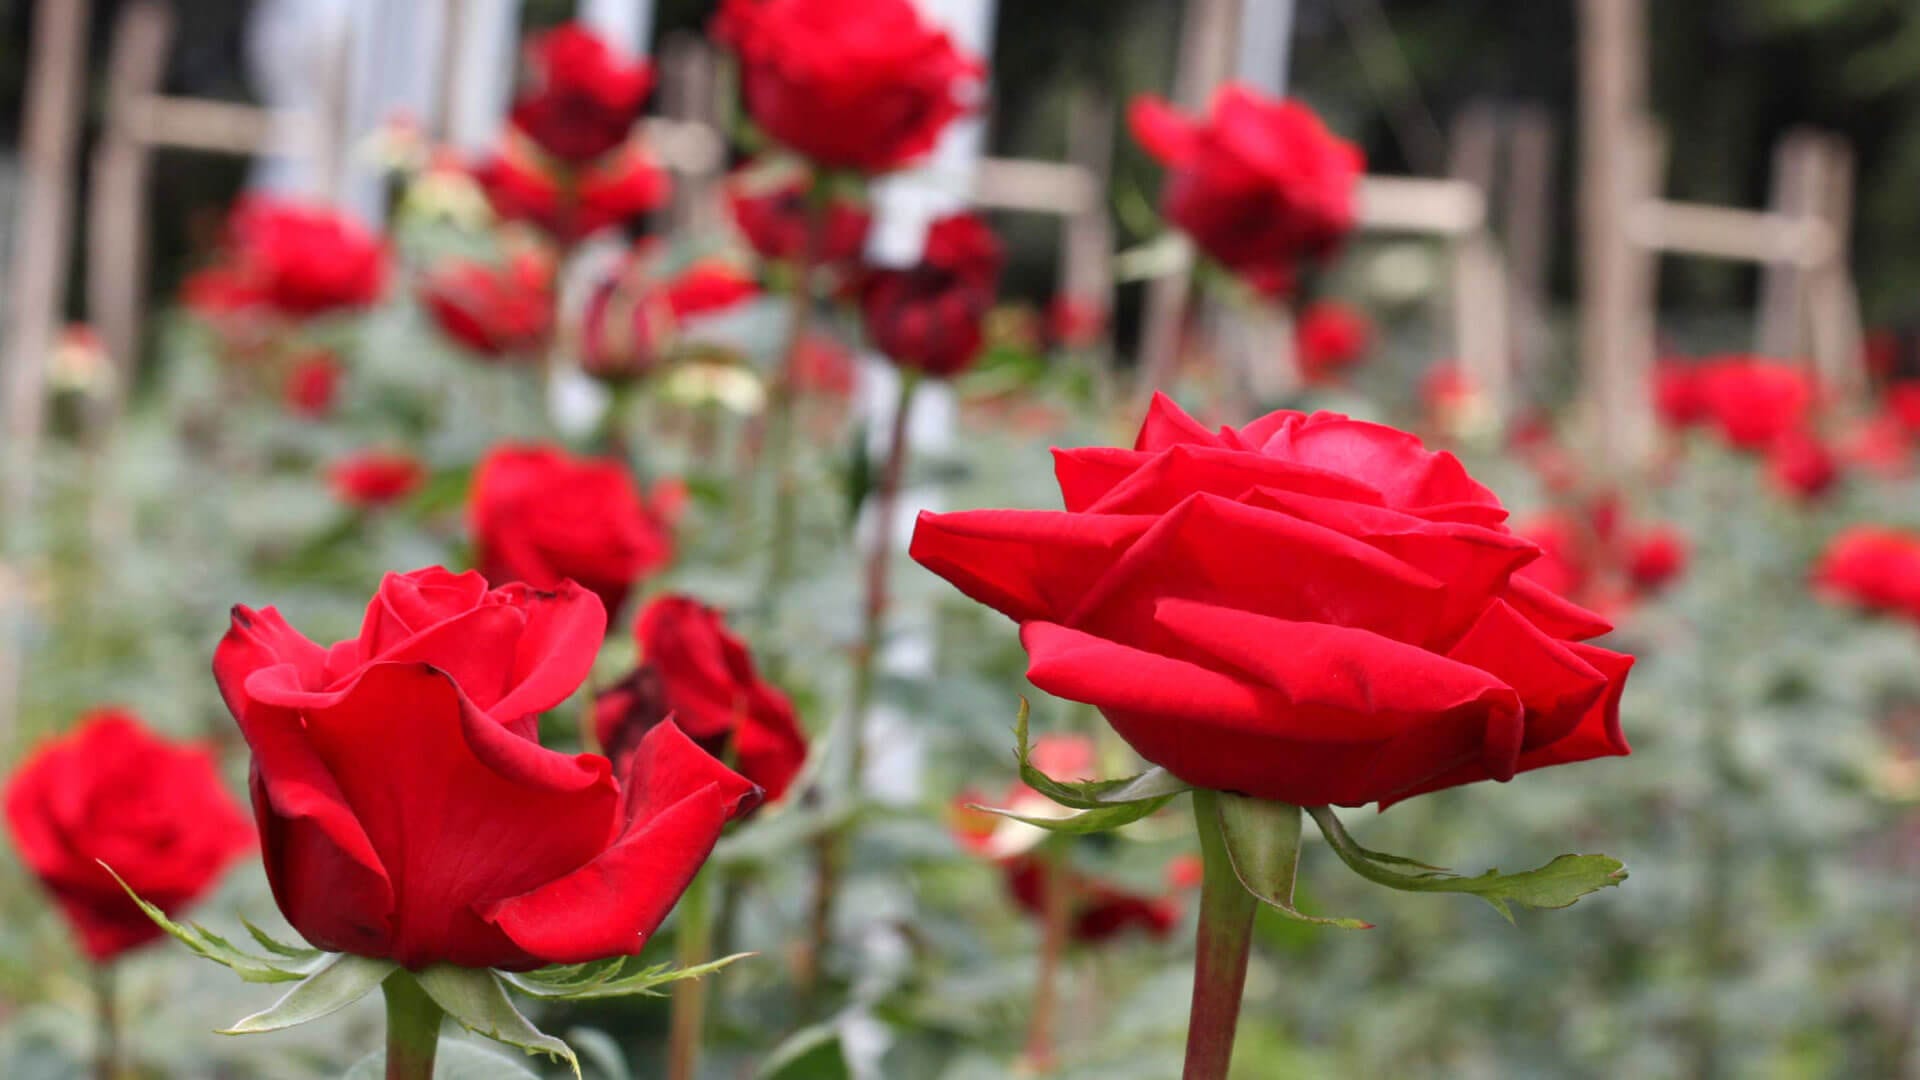 Decorate your garden with roses